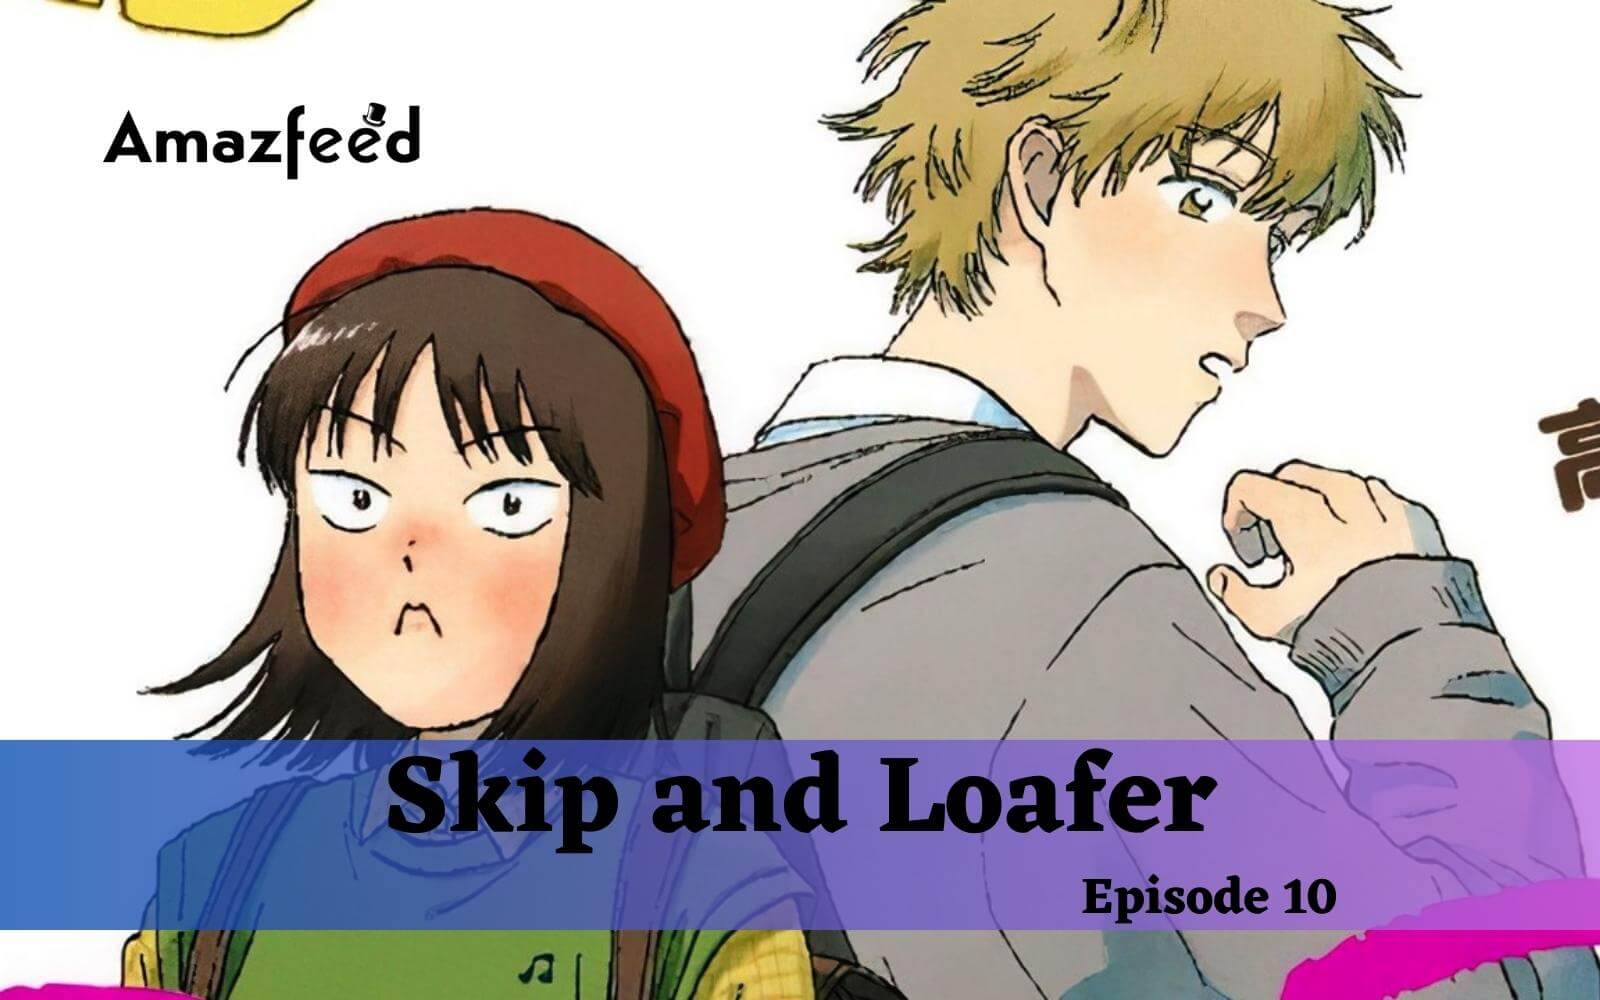 Skip and Loafer: Skip And Loafer Episode 6 release date, where to